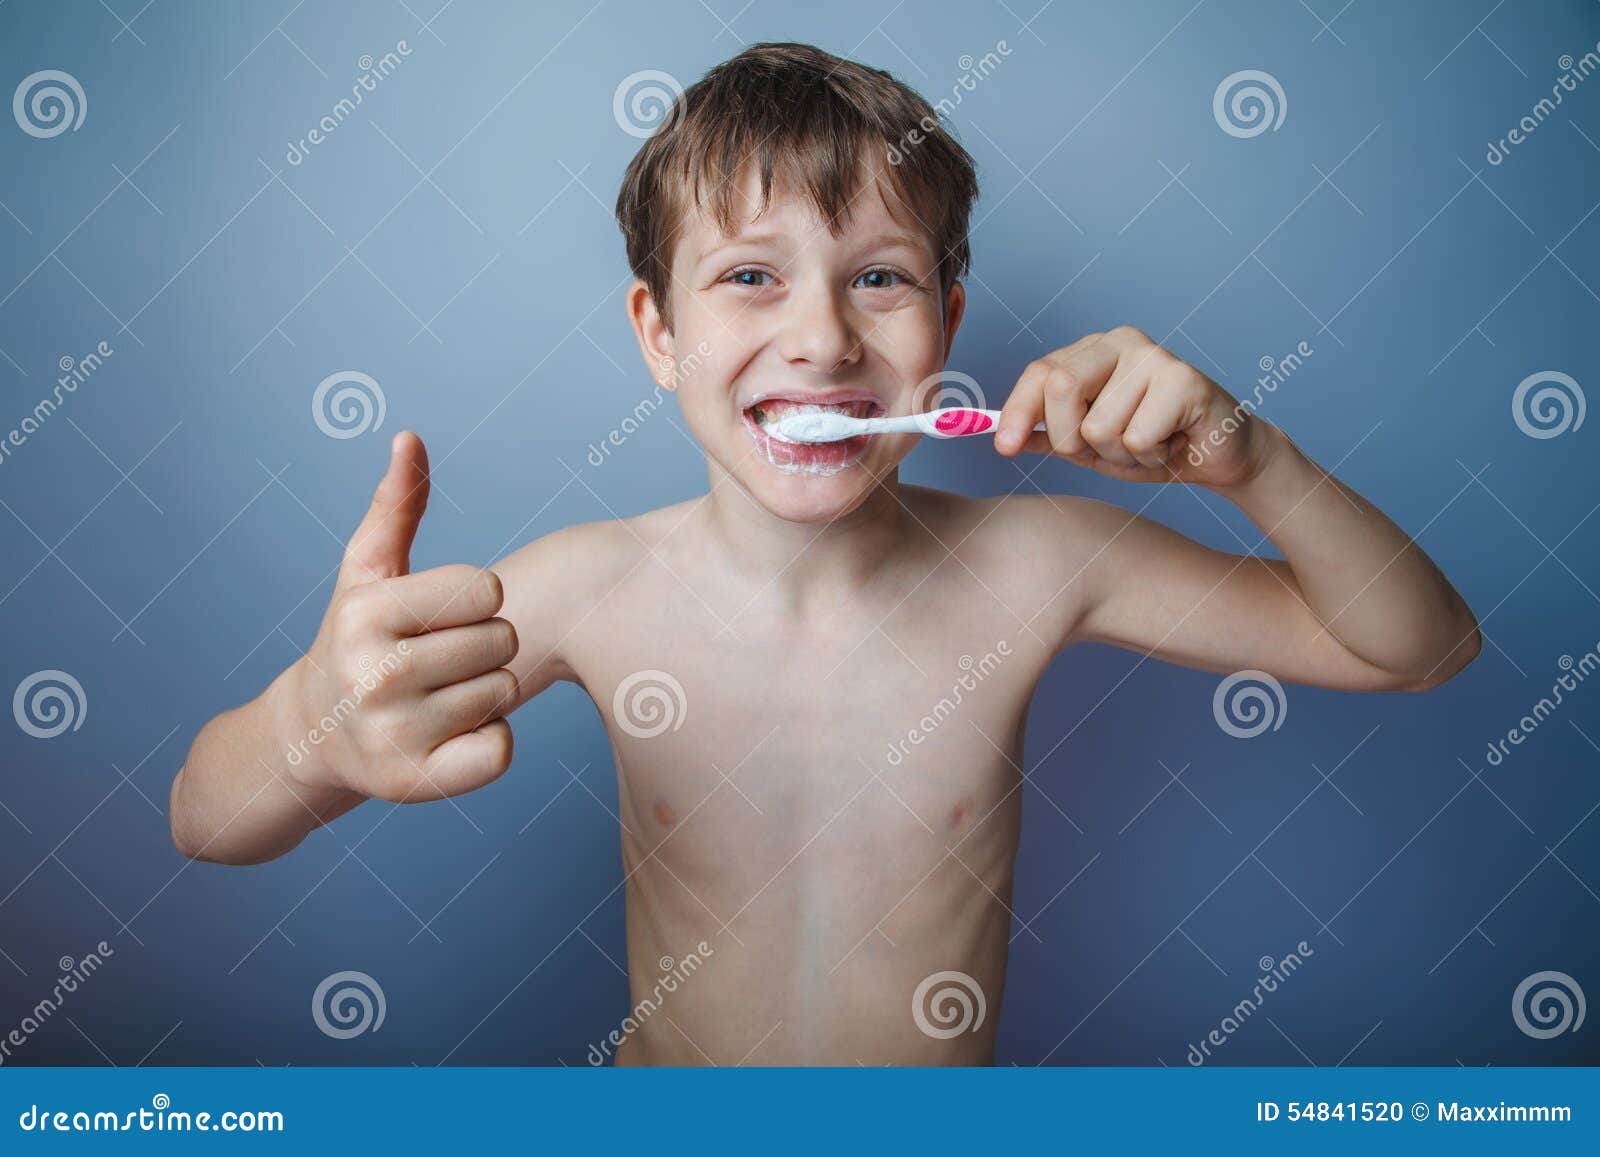 A Boy Of 10 Years Of European Appearance With Stock Photo 